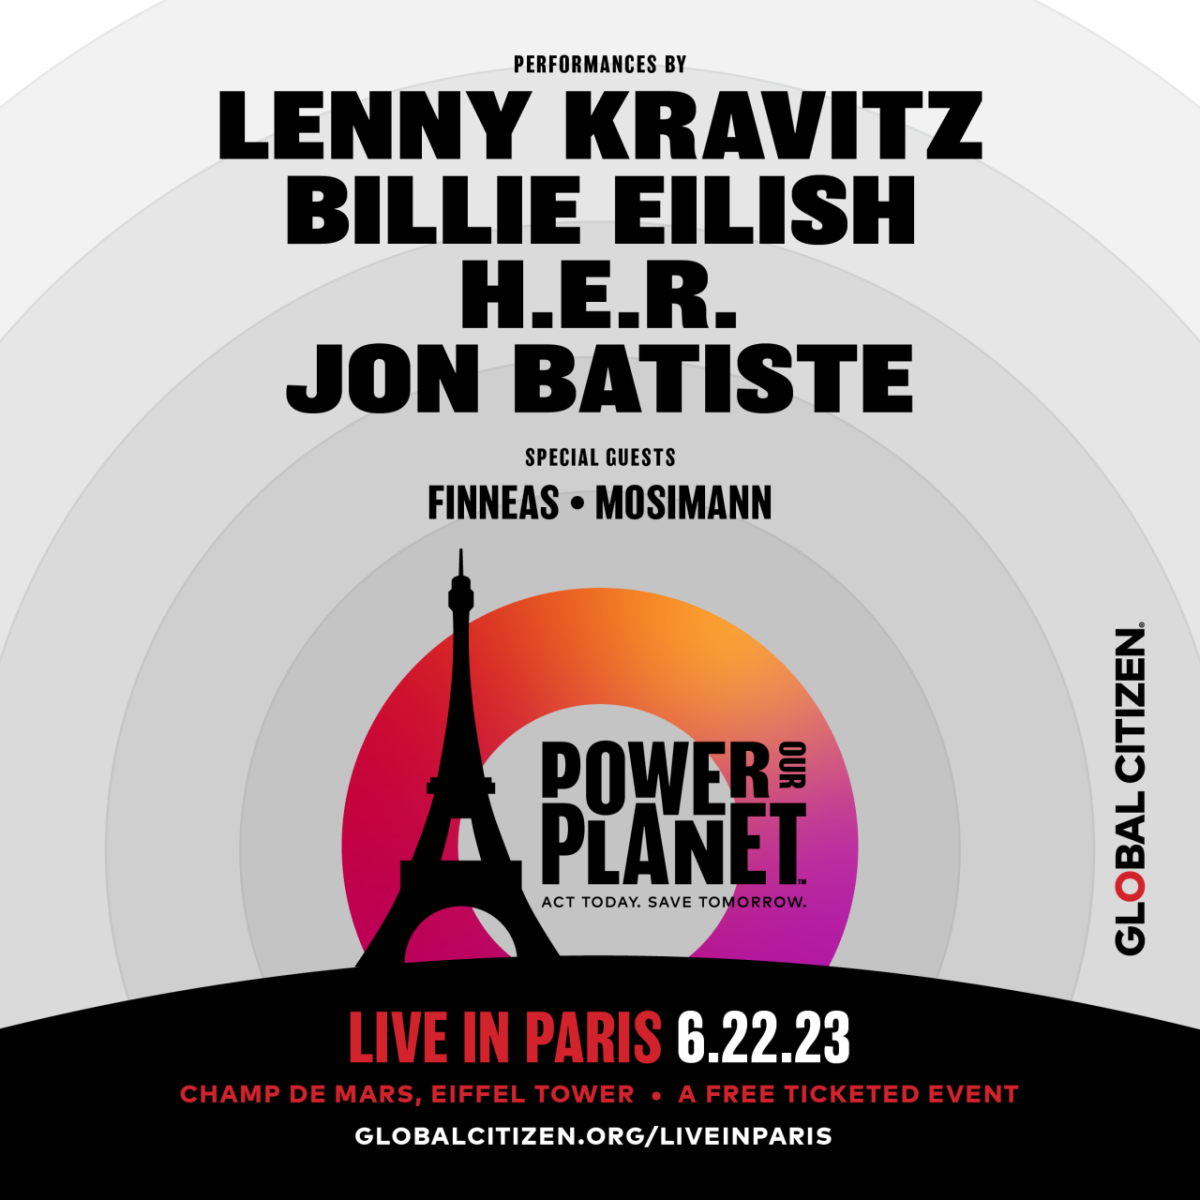 "Power Our Planet: Live in Paris" event banner